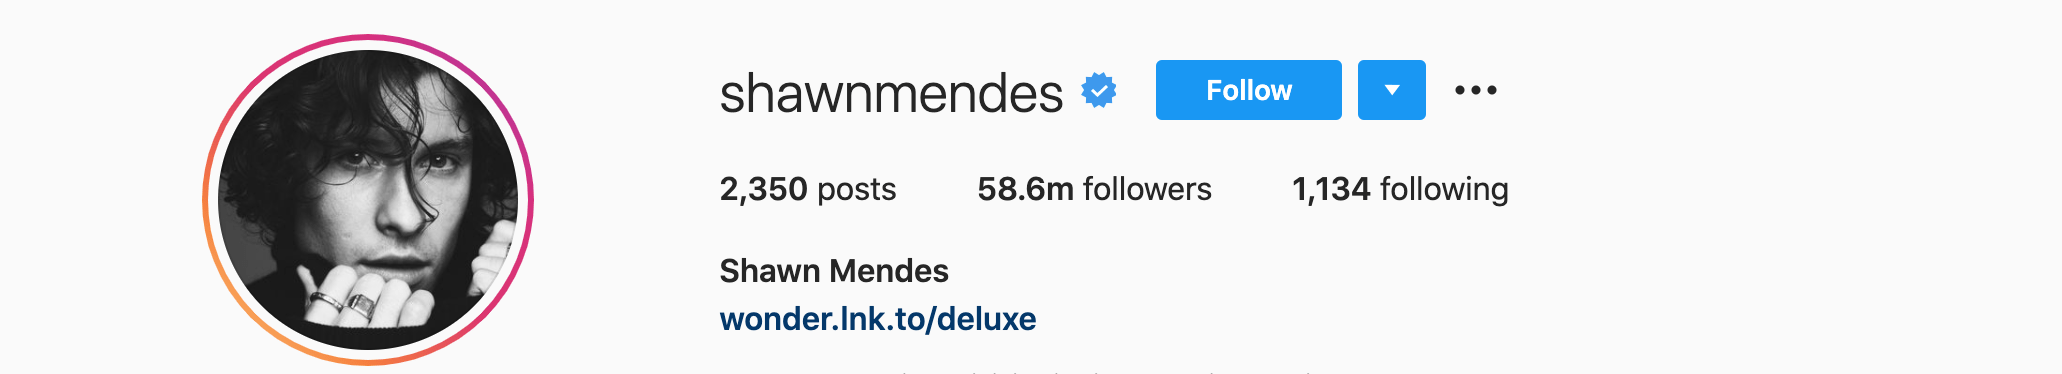 Top Instagram Influencers - SHAWN MENDES